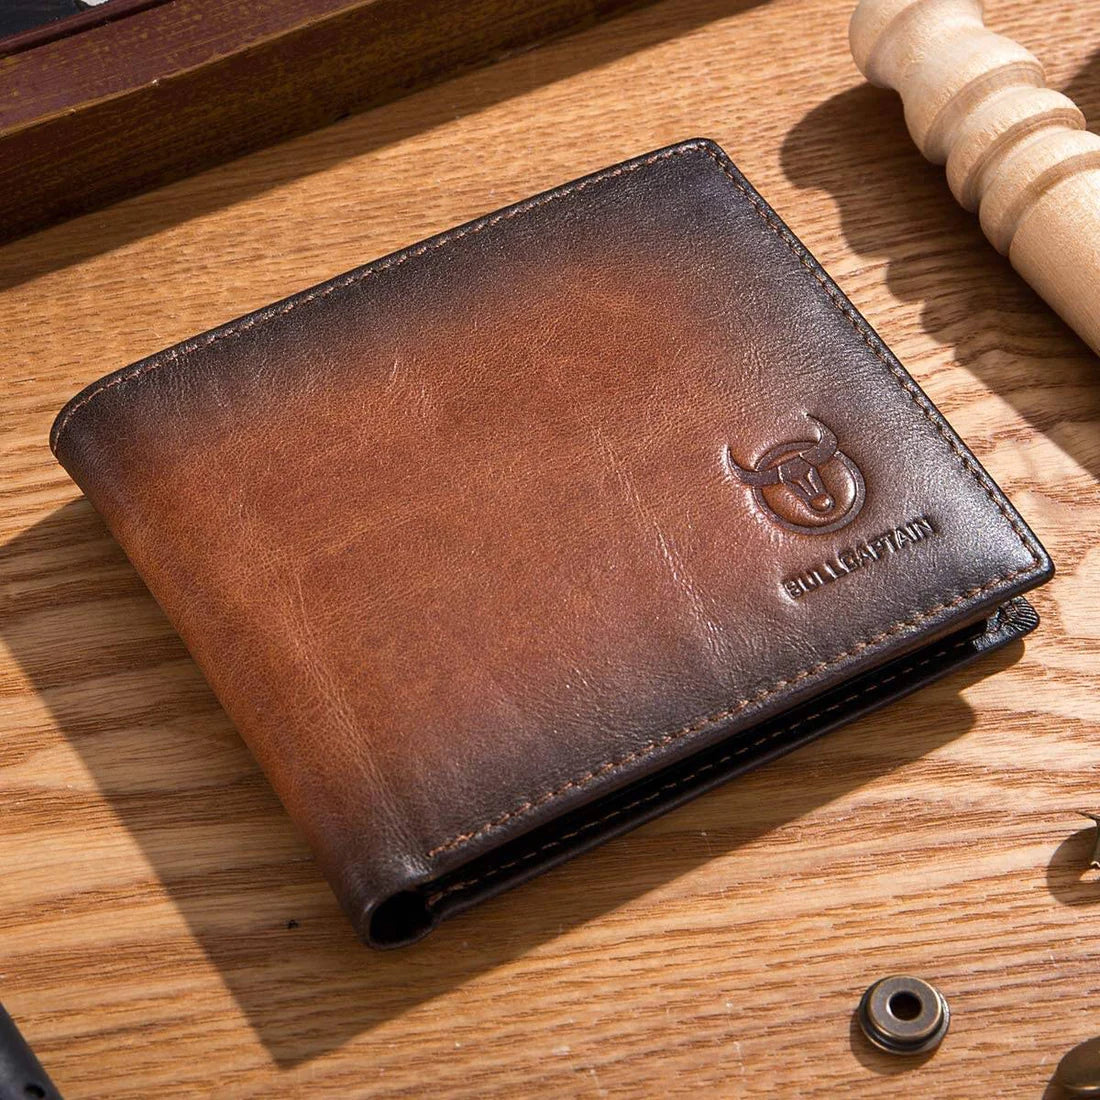 From Classic to Modern: The Range of BullCaptain Leather Wallet Designs